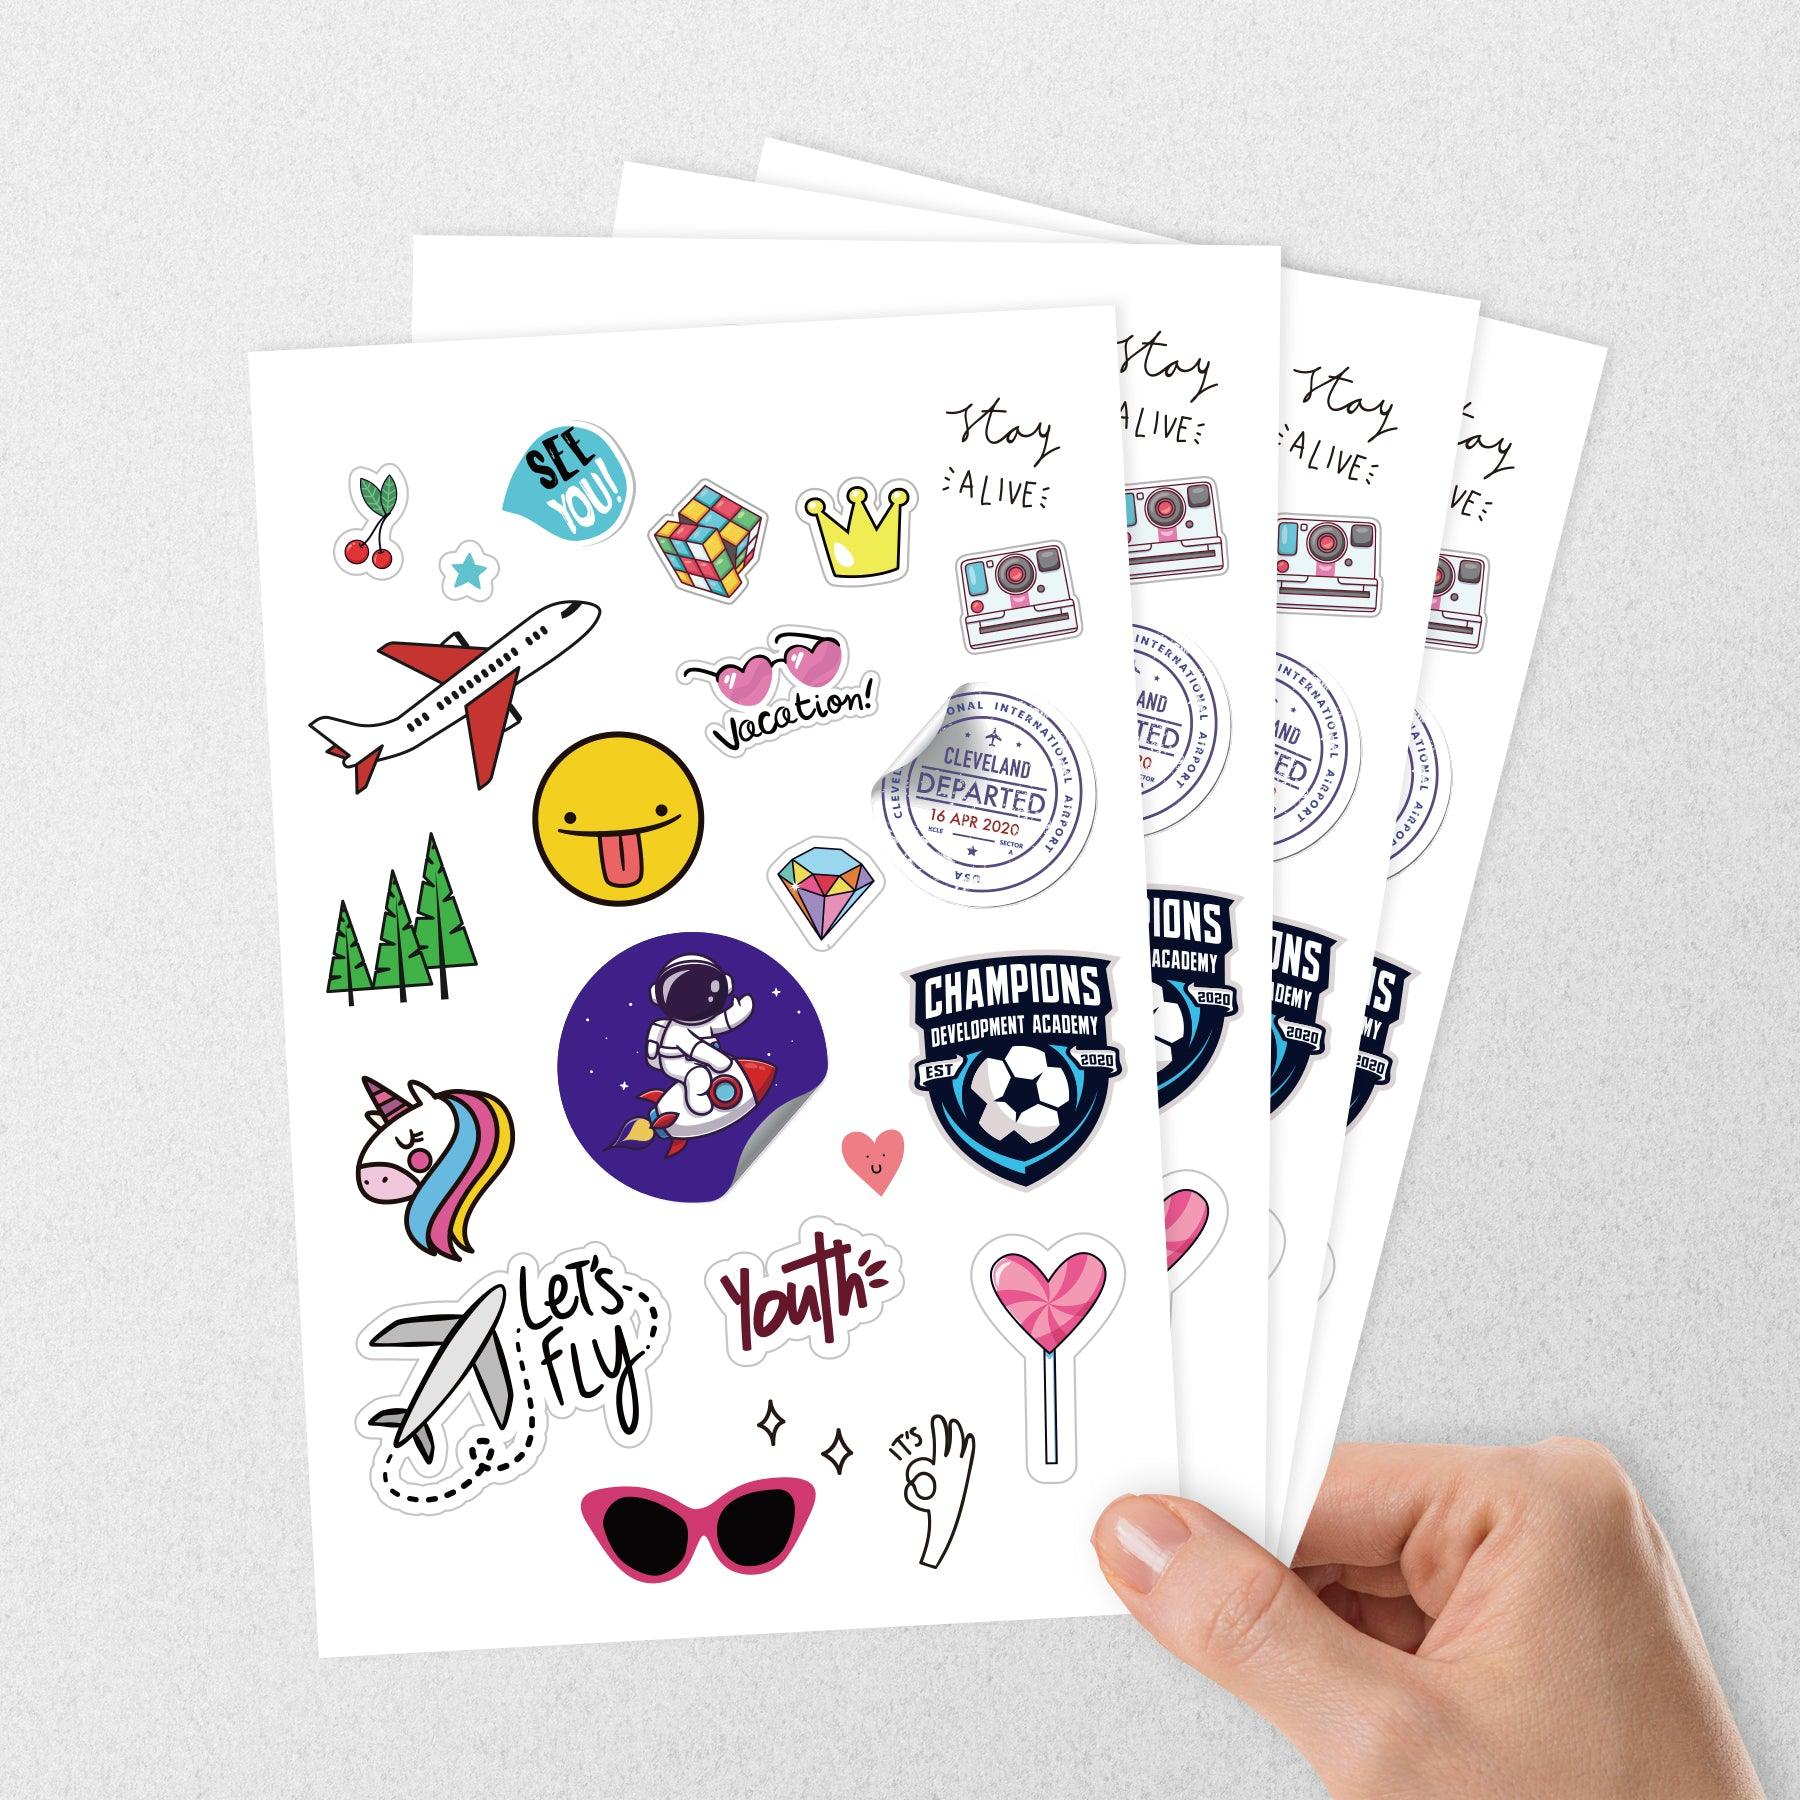 Glossy Paper Sticker Sheets.